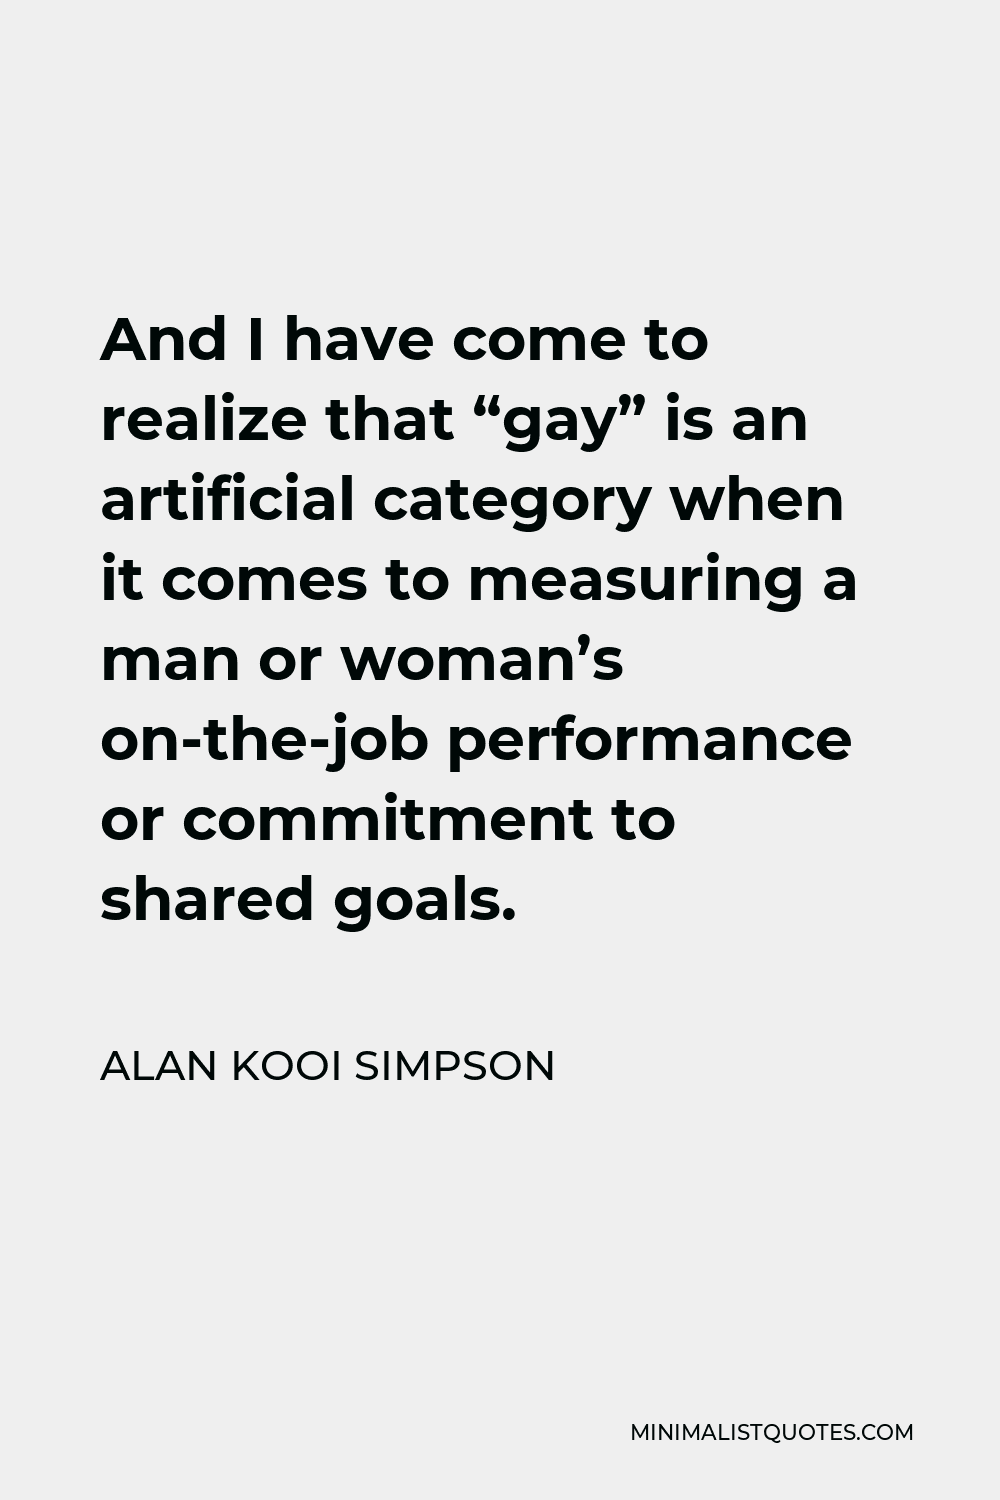 Alan Kooi Simpson Quote - And I have come to realize that “gay” is an artificial category when it comes to measuring a man or woman’s on-the-job performance or commitment to shared goals.